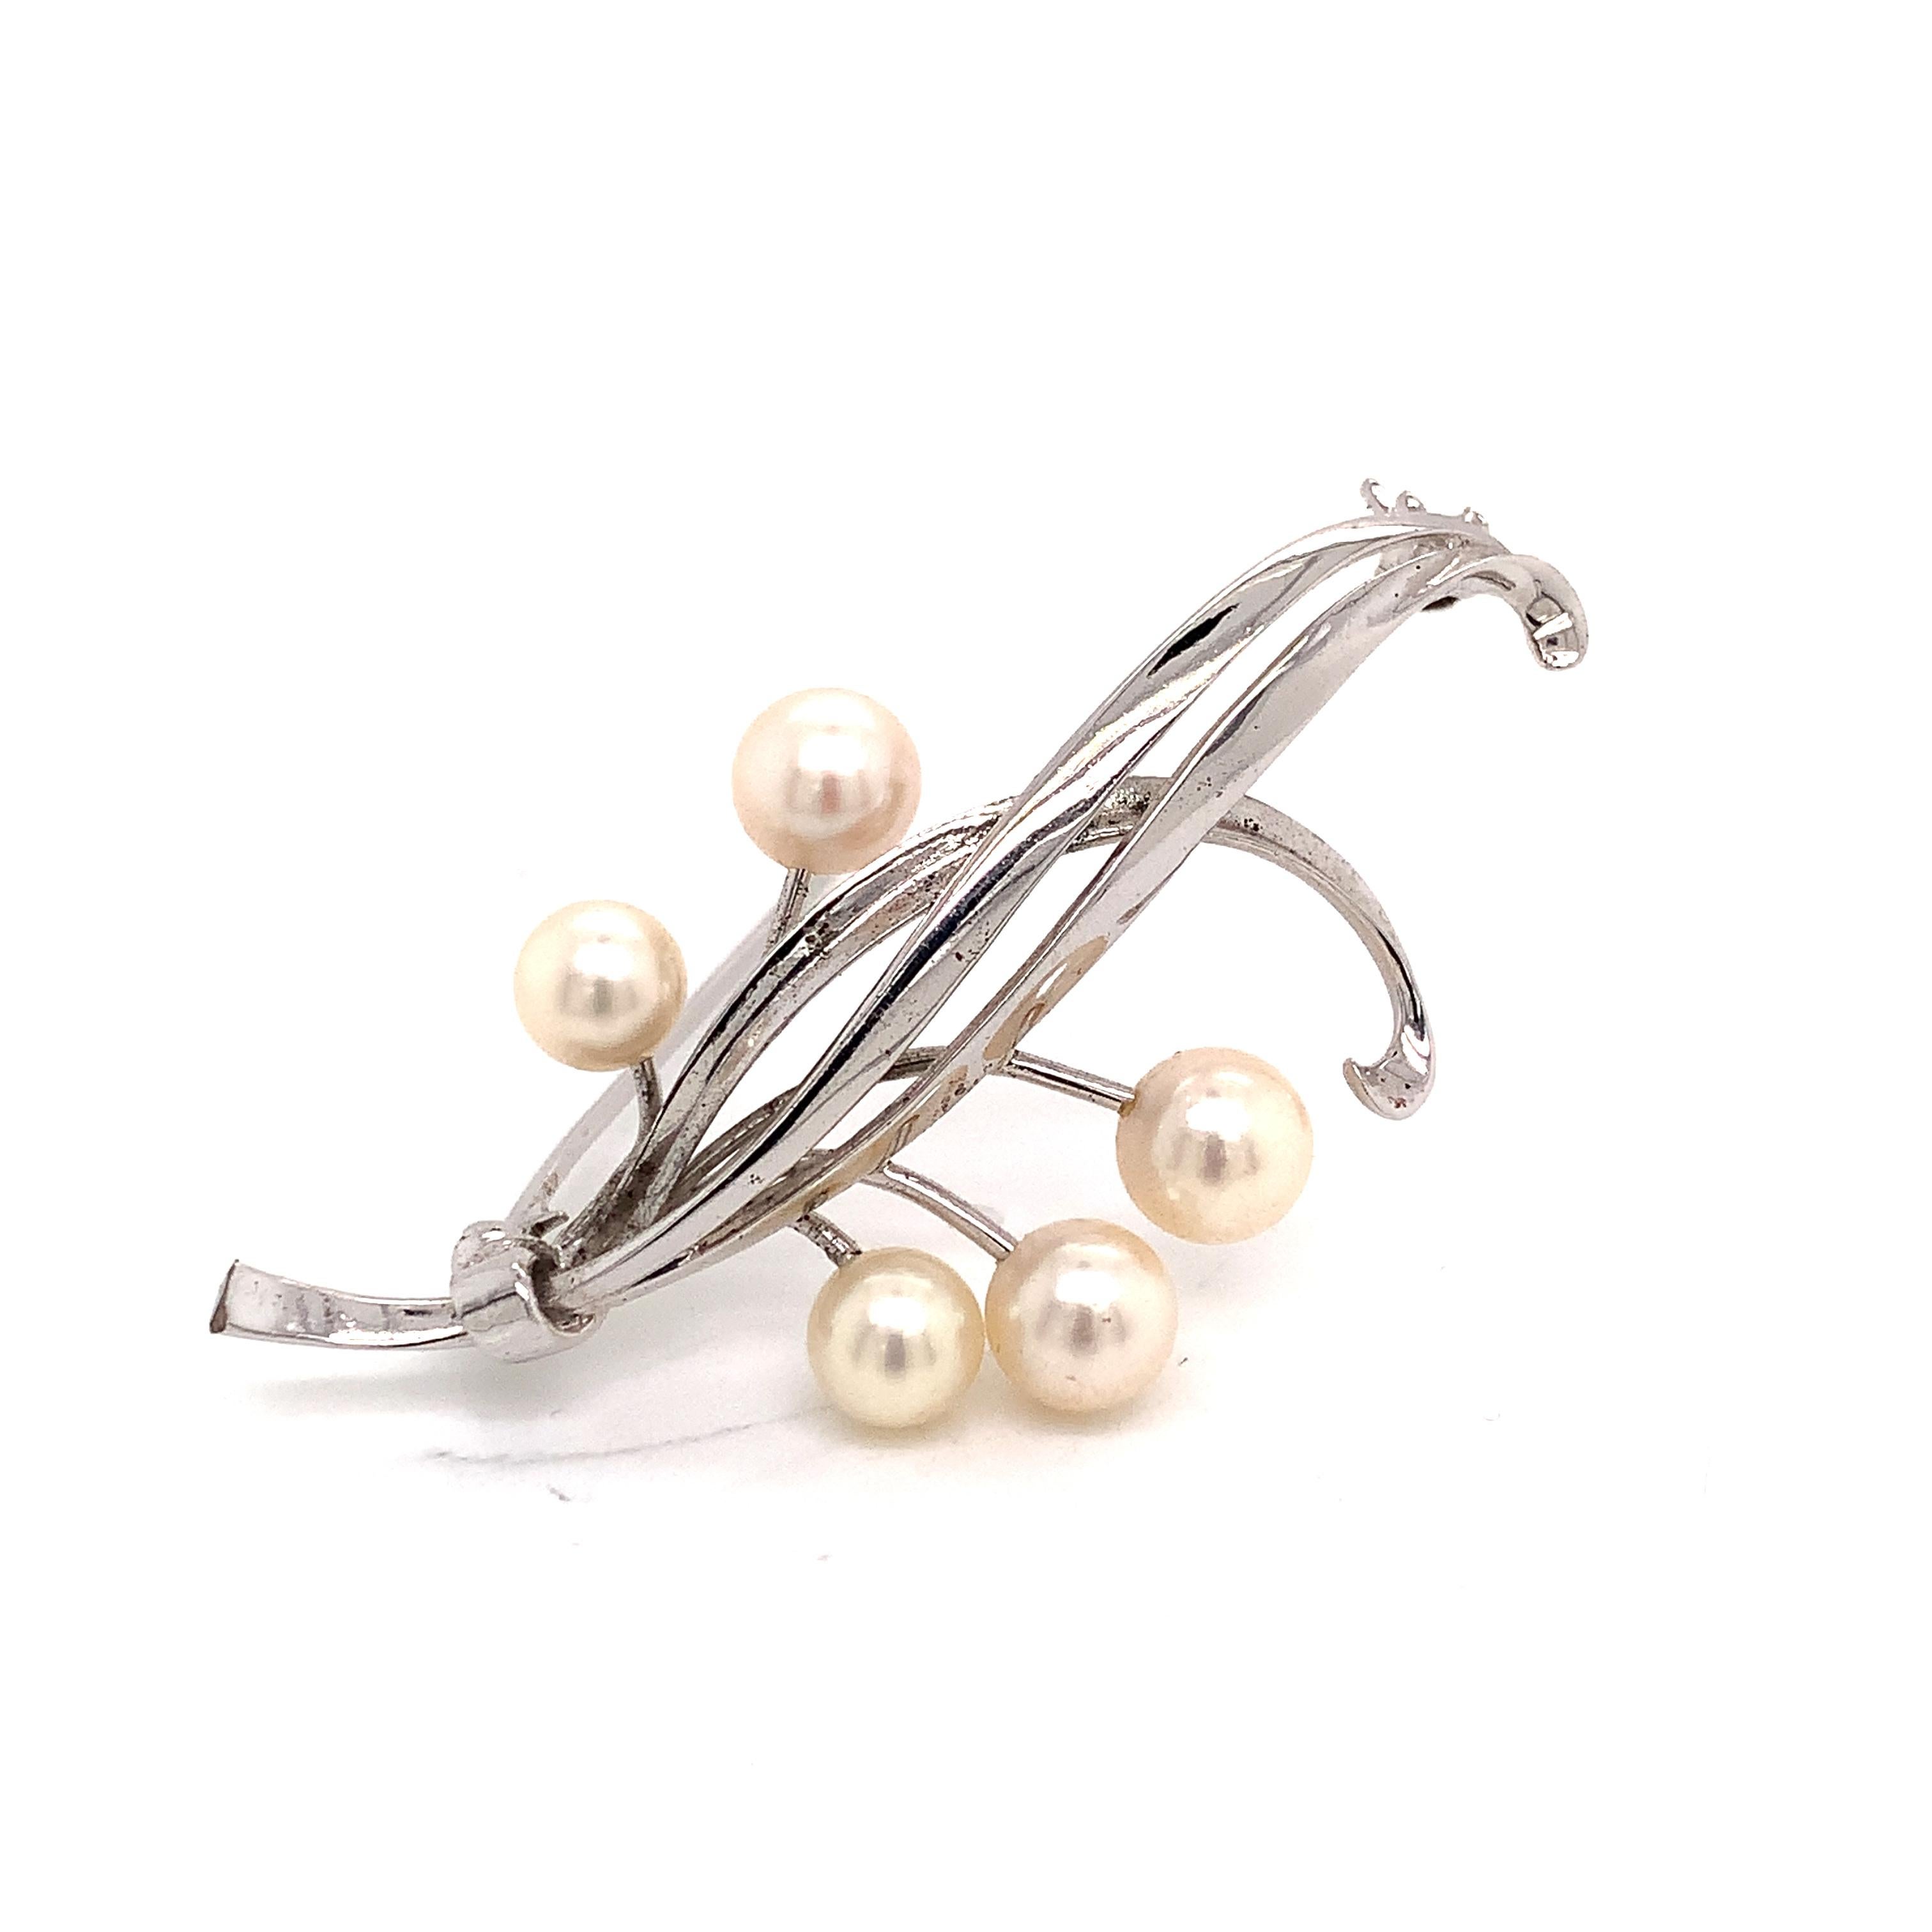 Mikimoto Estate Akoya Pearl Brooch Pin Sterling Silver 6.6 mm 5.43 Grams M352

This elegant Authentic Mikimoto Estate sterling silver brooch has 5 Saltwater Akoya Cultured Pearls ranging in size from 5.8 - 6.6 mm with a weight of 5.43